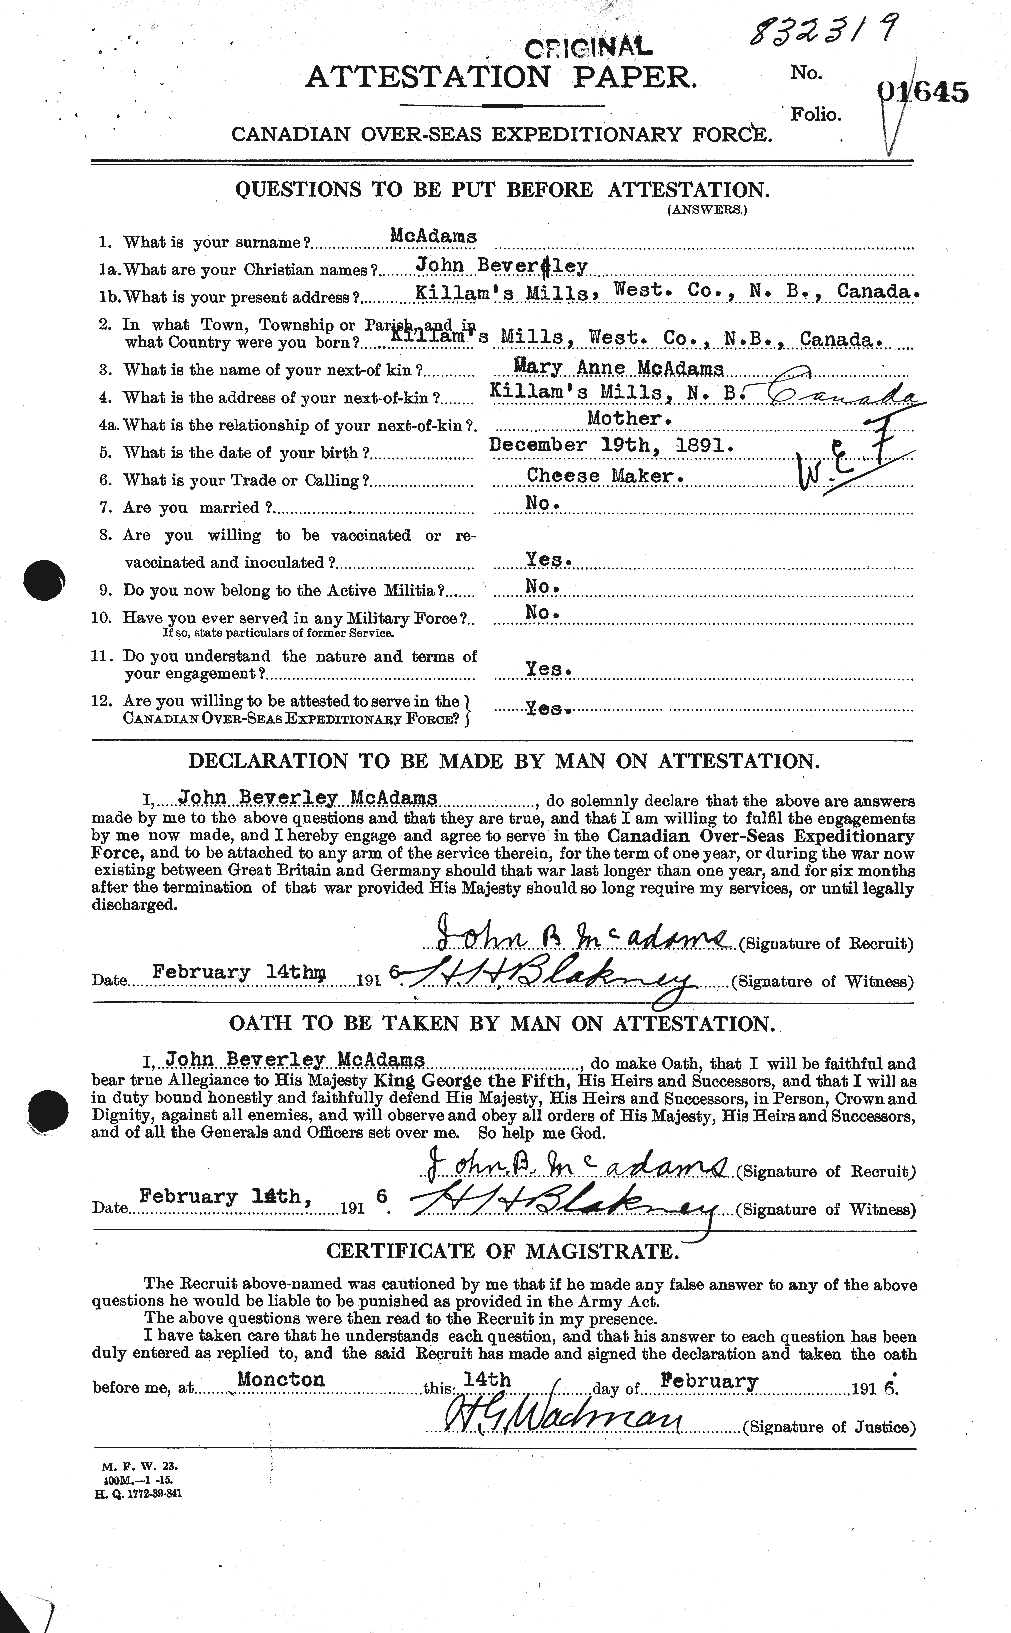 Personnel Records of the First World War - CEF 130215a